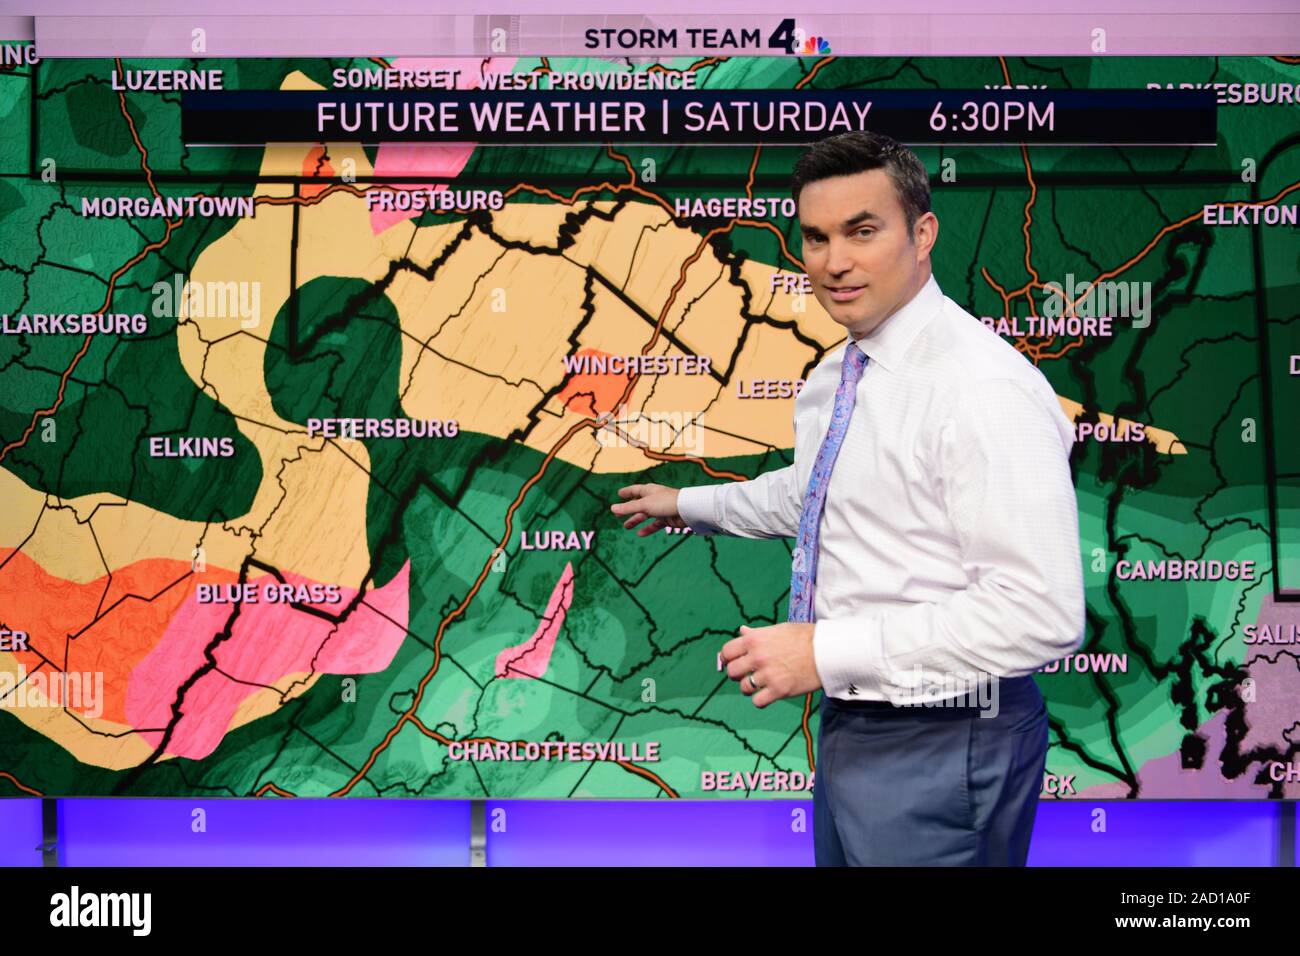 Meteorologist working on a weather forecast prediction for a Washington DC television station Stock Photo